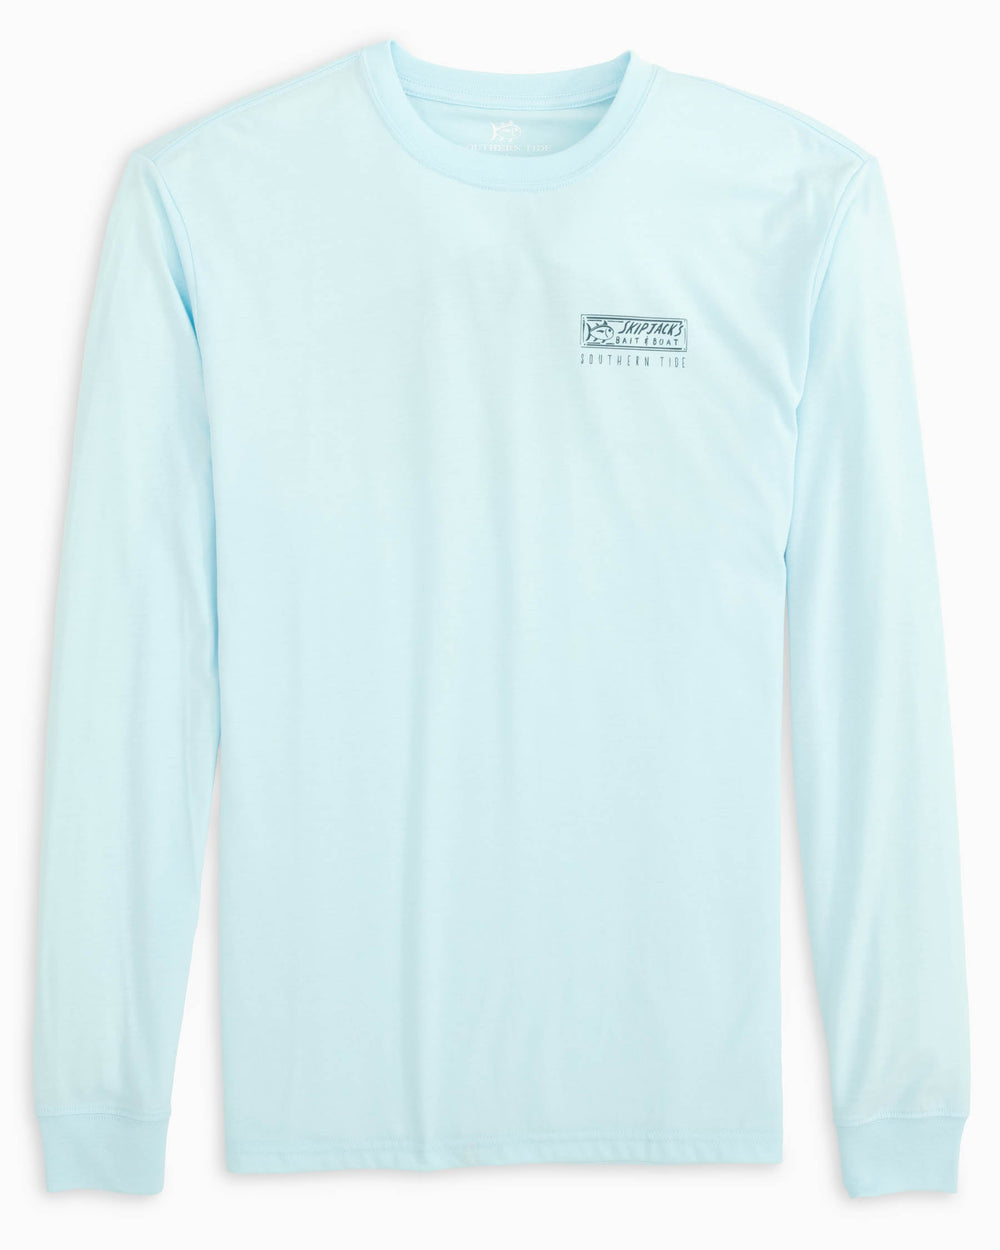 The front view of the Bait Shop Long Sleeve T-Shirt by Southern Tide - Iced Aqua